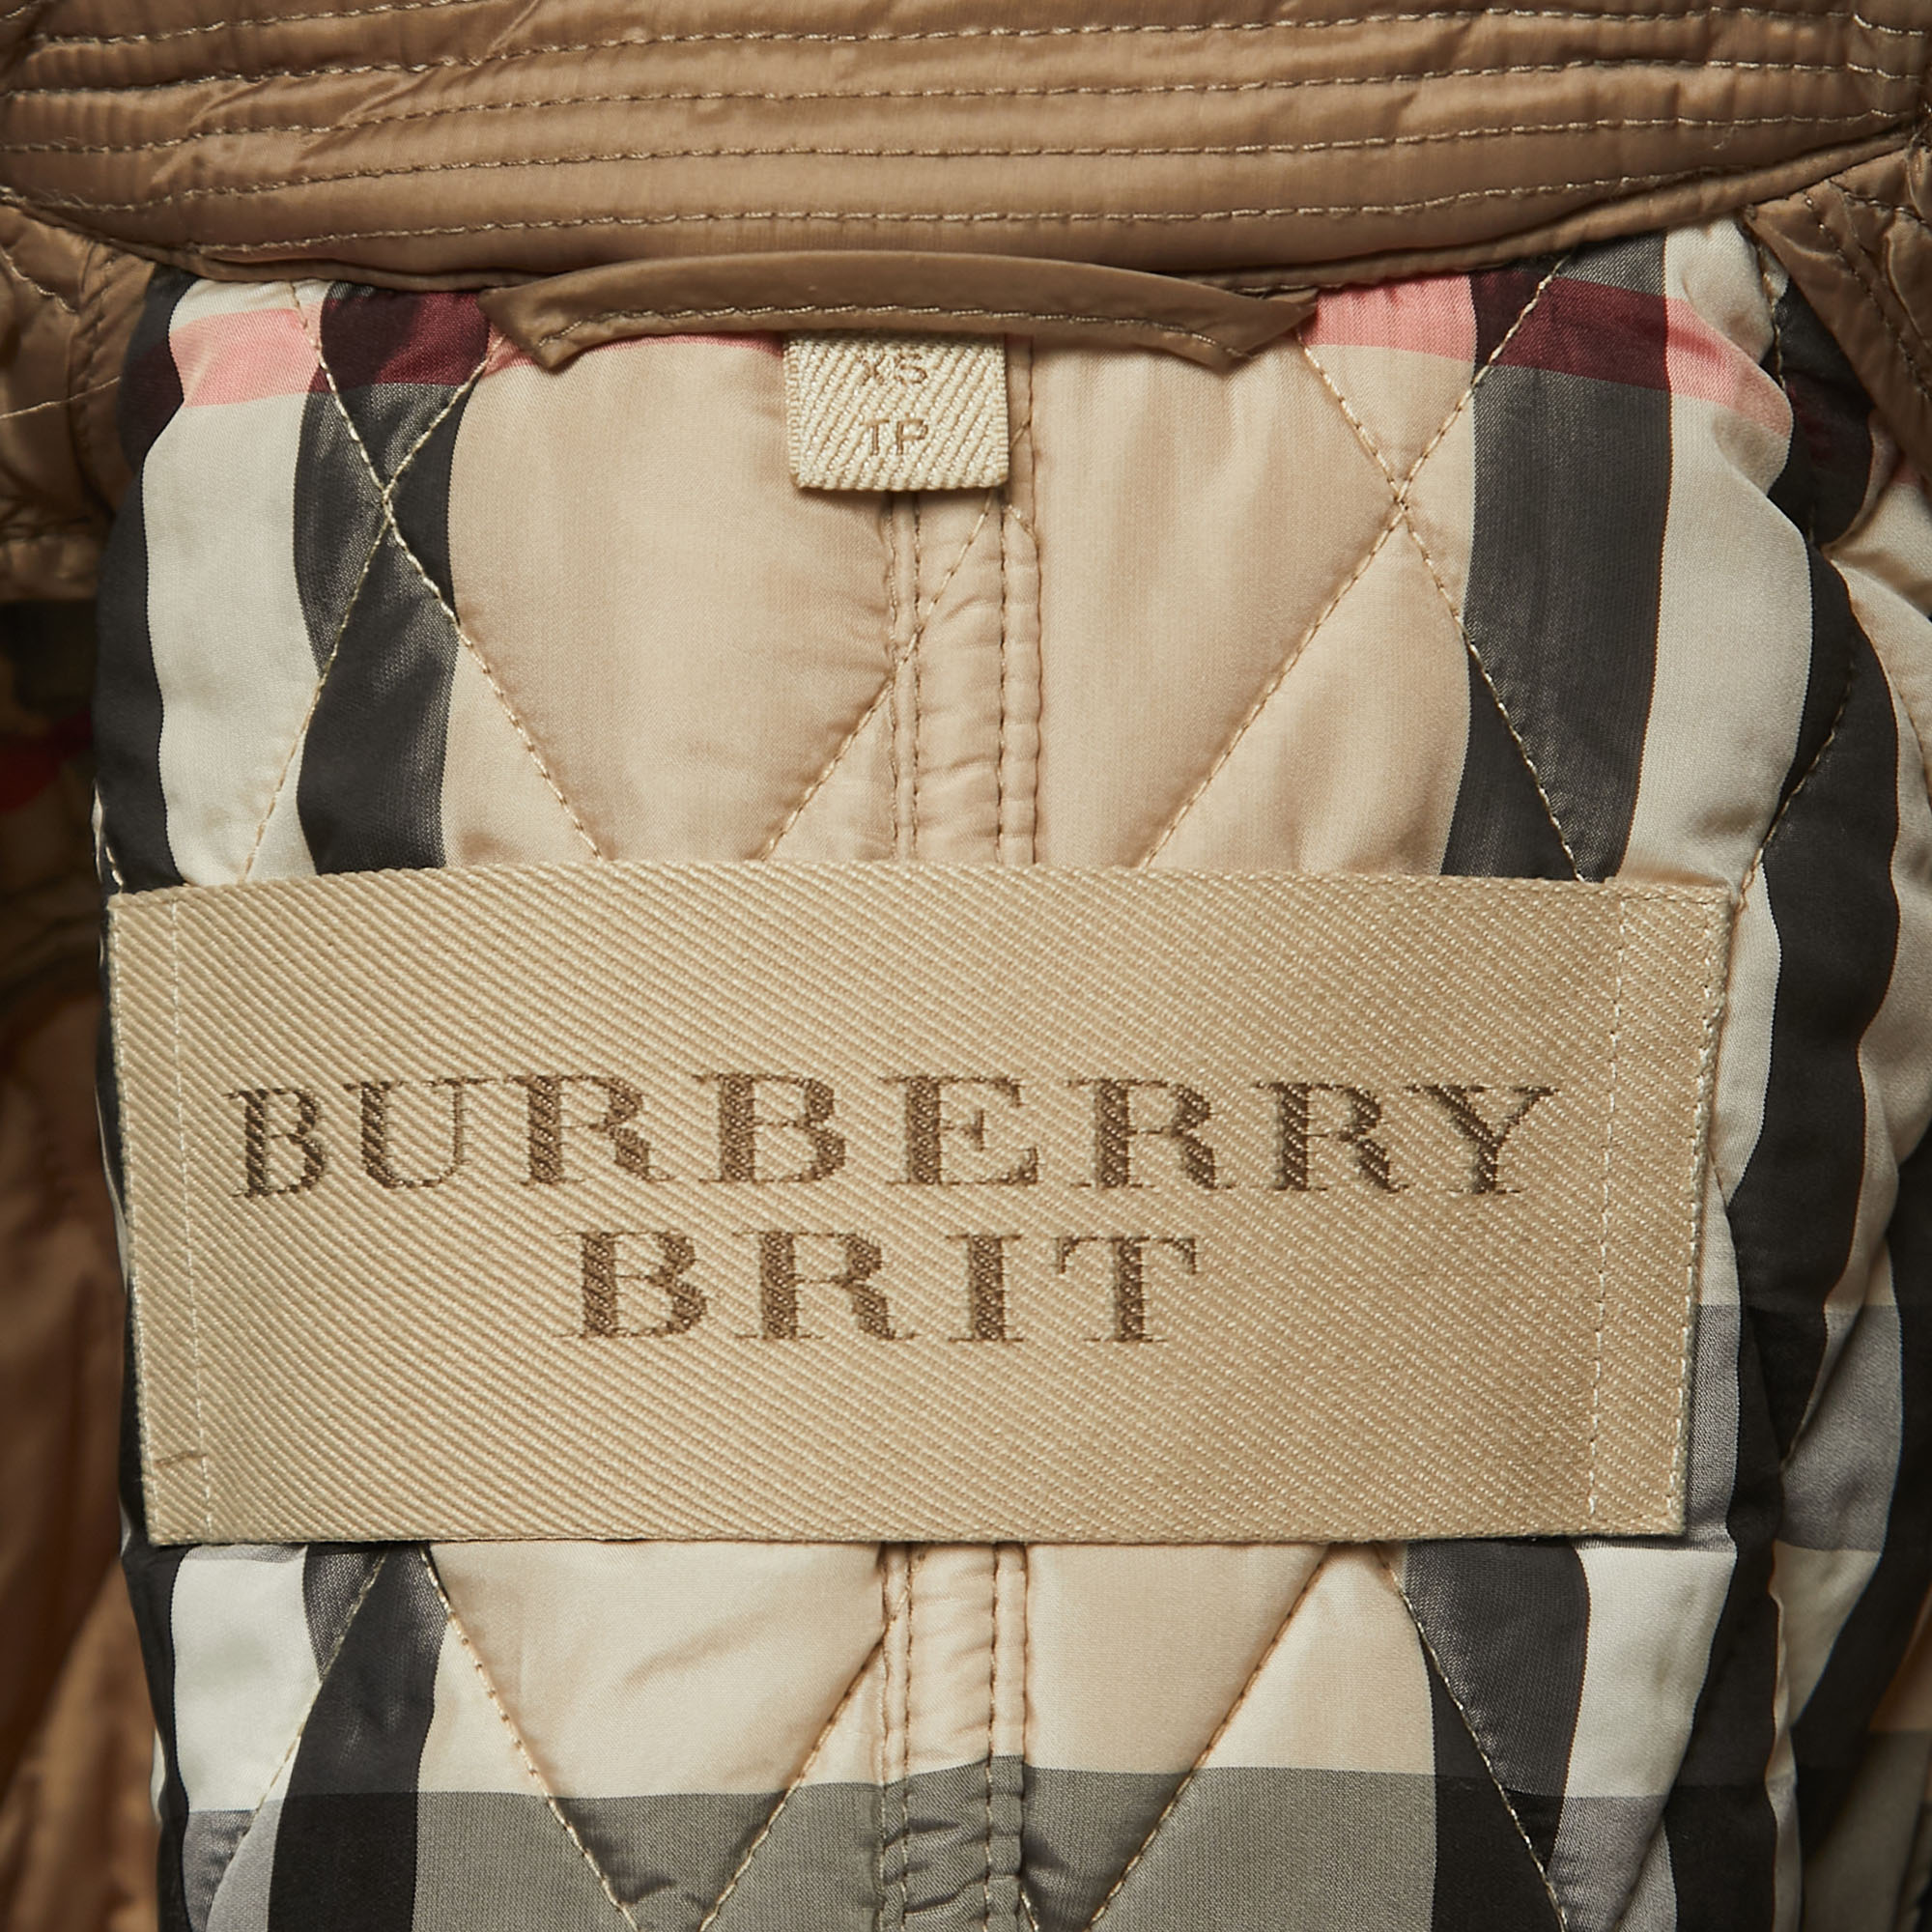 Burberry Brit Beige Nylon Double Breasted Coat XS